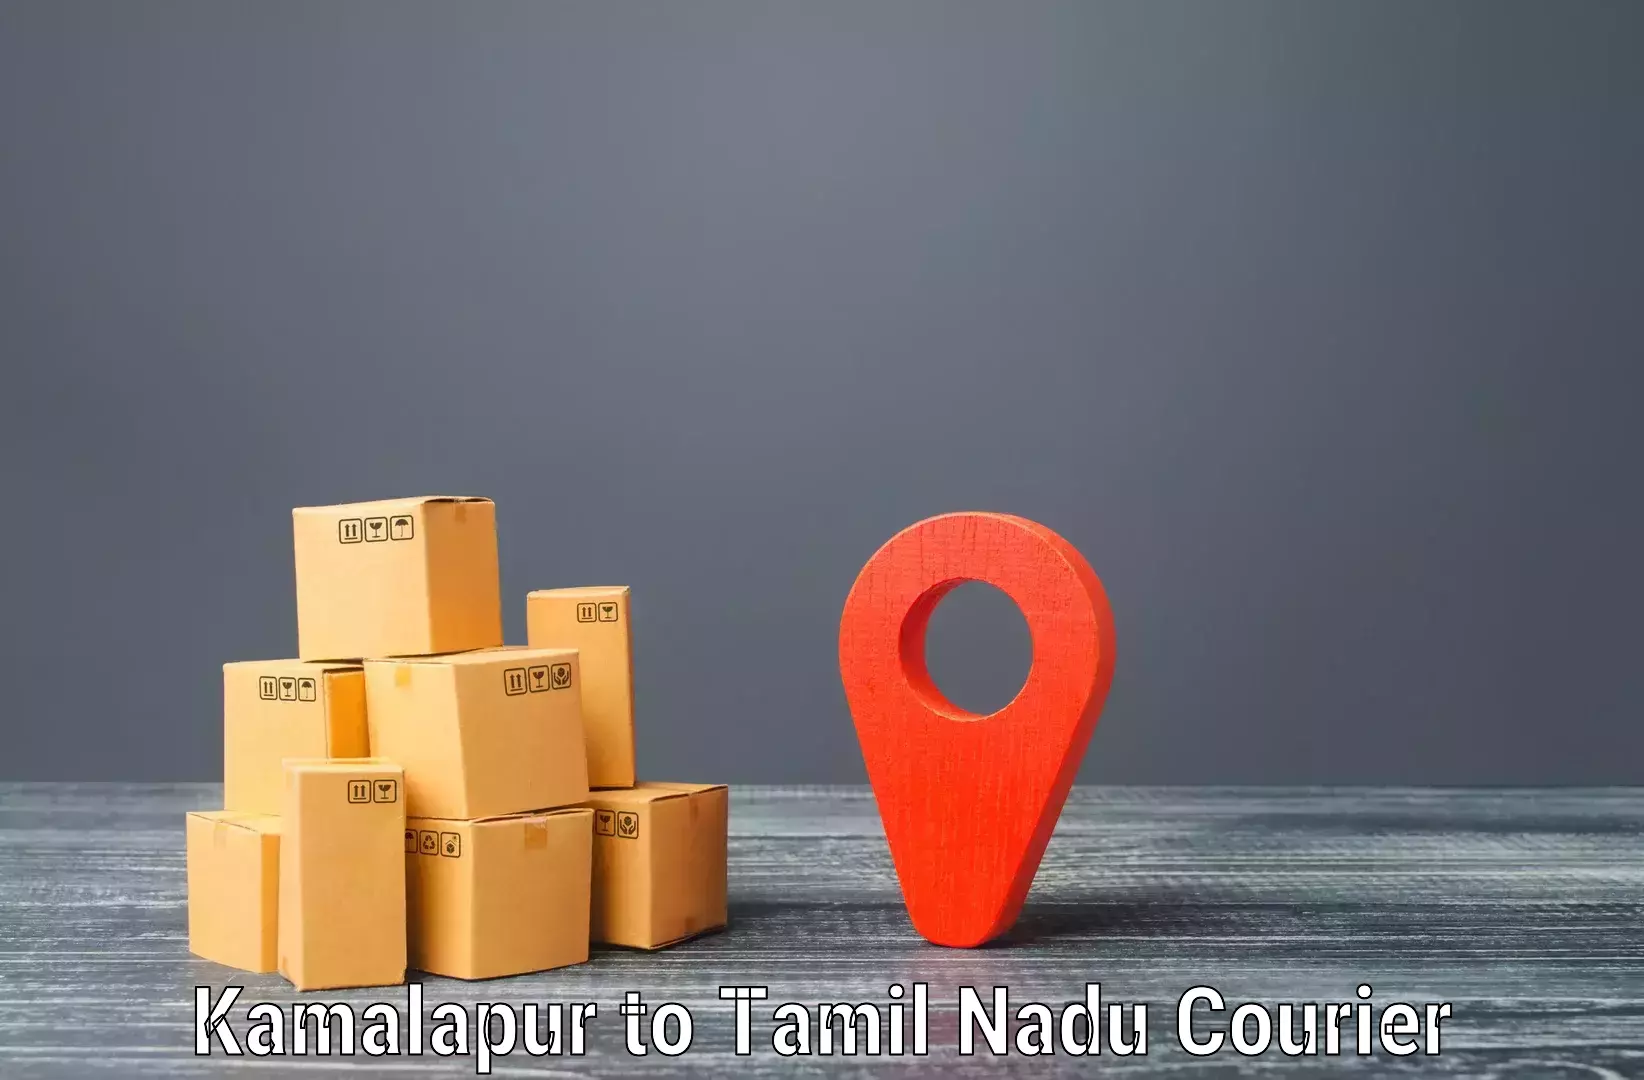 Reliable package handling Kamalapur to Anthiyur